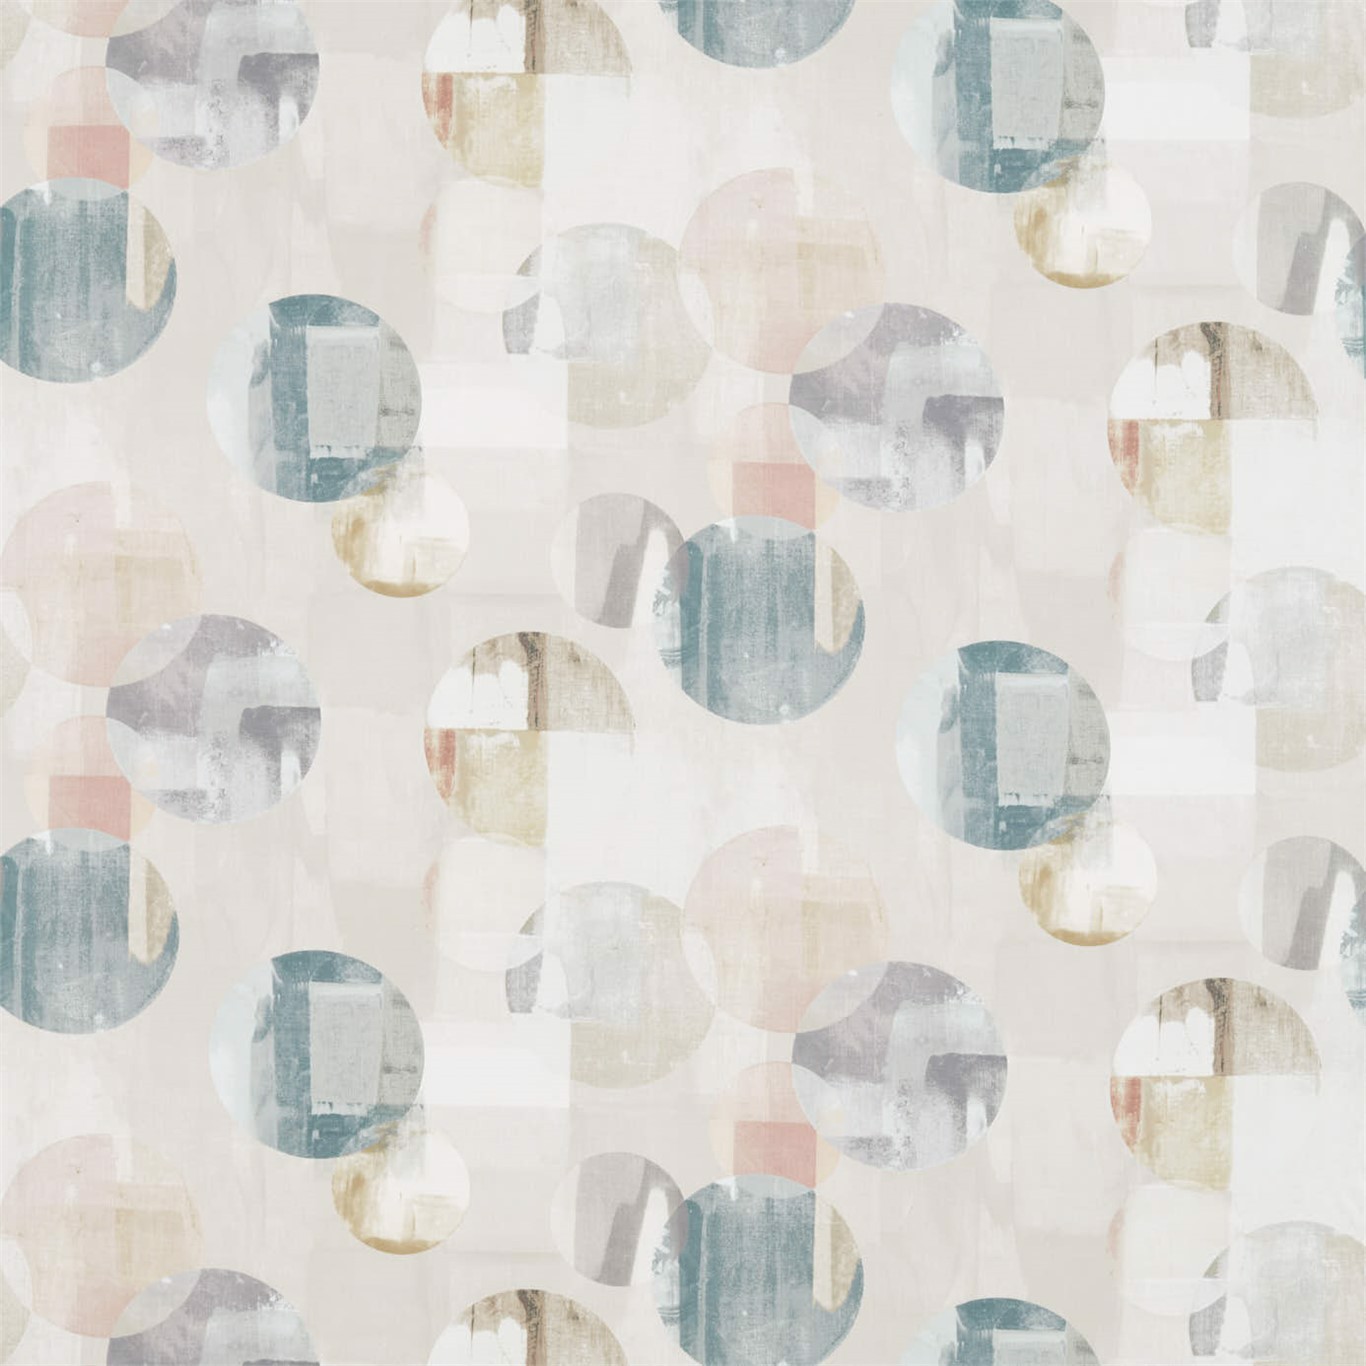 Rondure Seaglass / Blush / Taupe Fabric by HAR